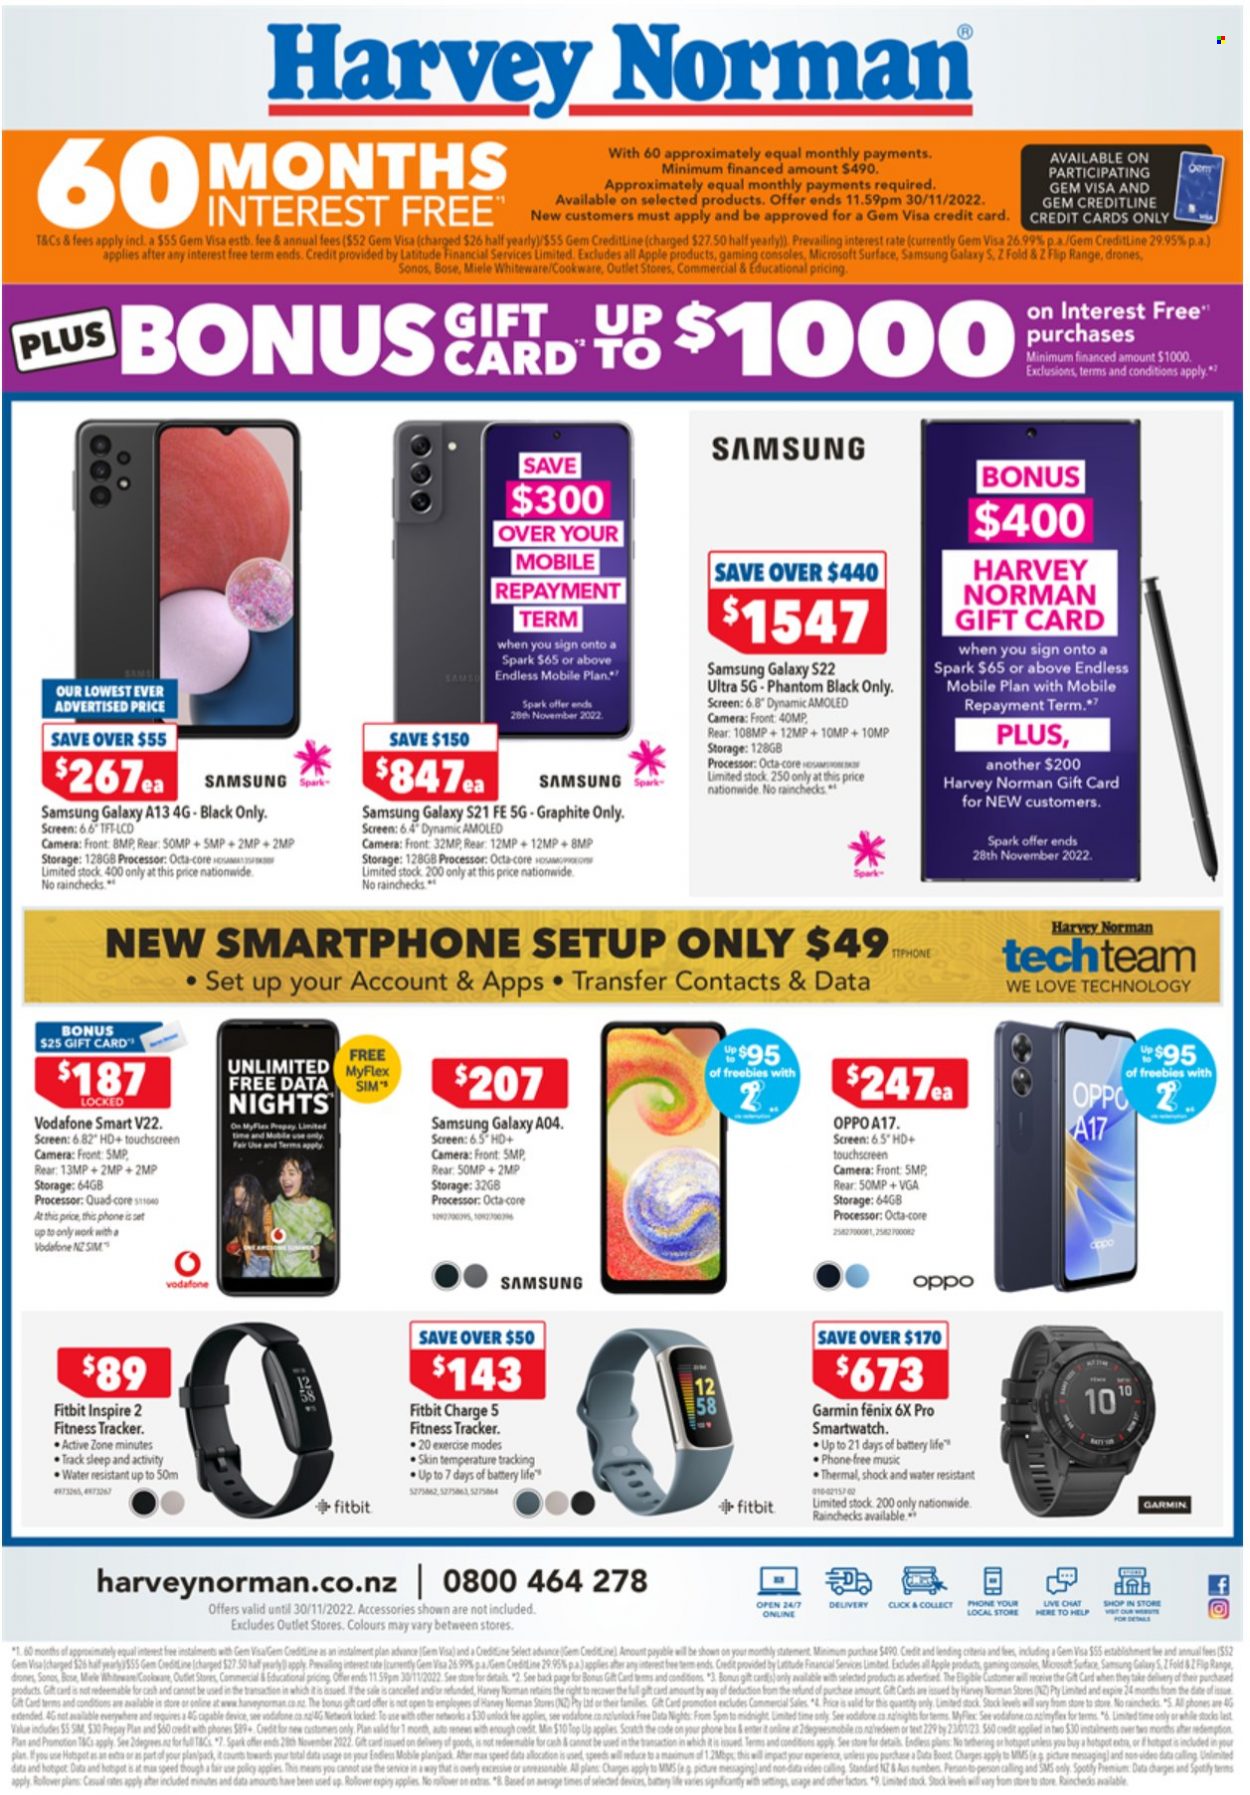 thumbnail - Harvey Norman mailer - 25.11.2022 - 27.11.2022 - Sales products - Hama, Apple, Samsung Galaxy, drone, Samsung, Oppo, Samsung Galaxy S, smartphone, Samsung Galaxy S21, Garmin, Fitbit, fitness tracker, smart watch, camera, Sonos, BOSE, Miele. Page 3.